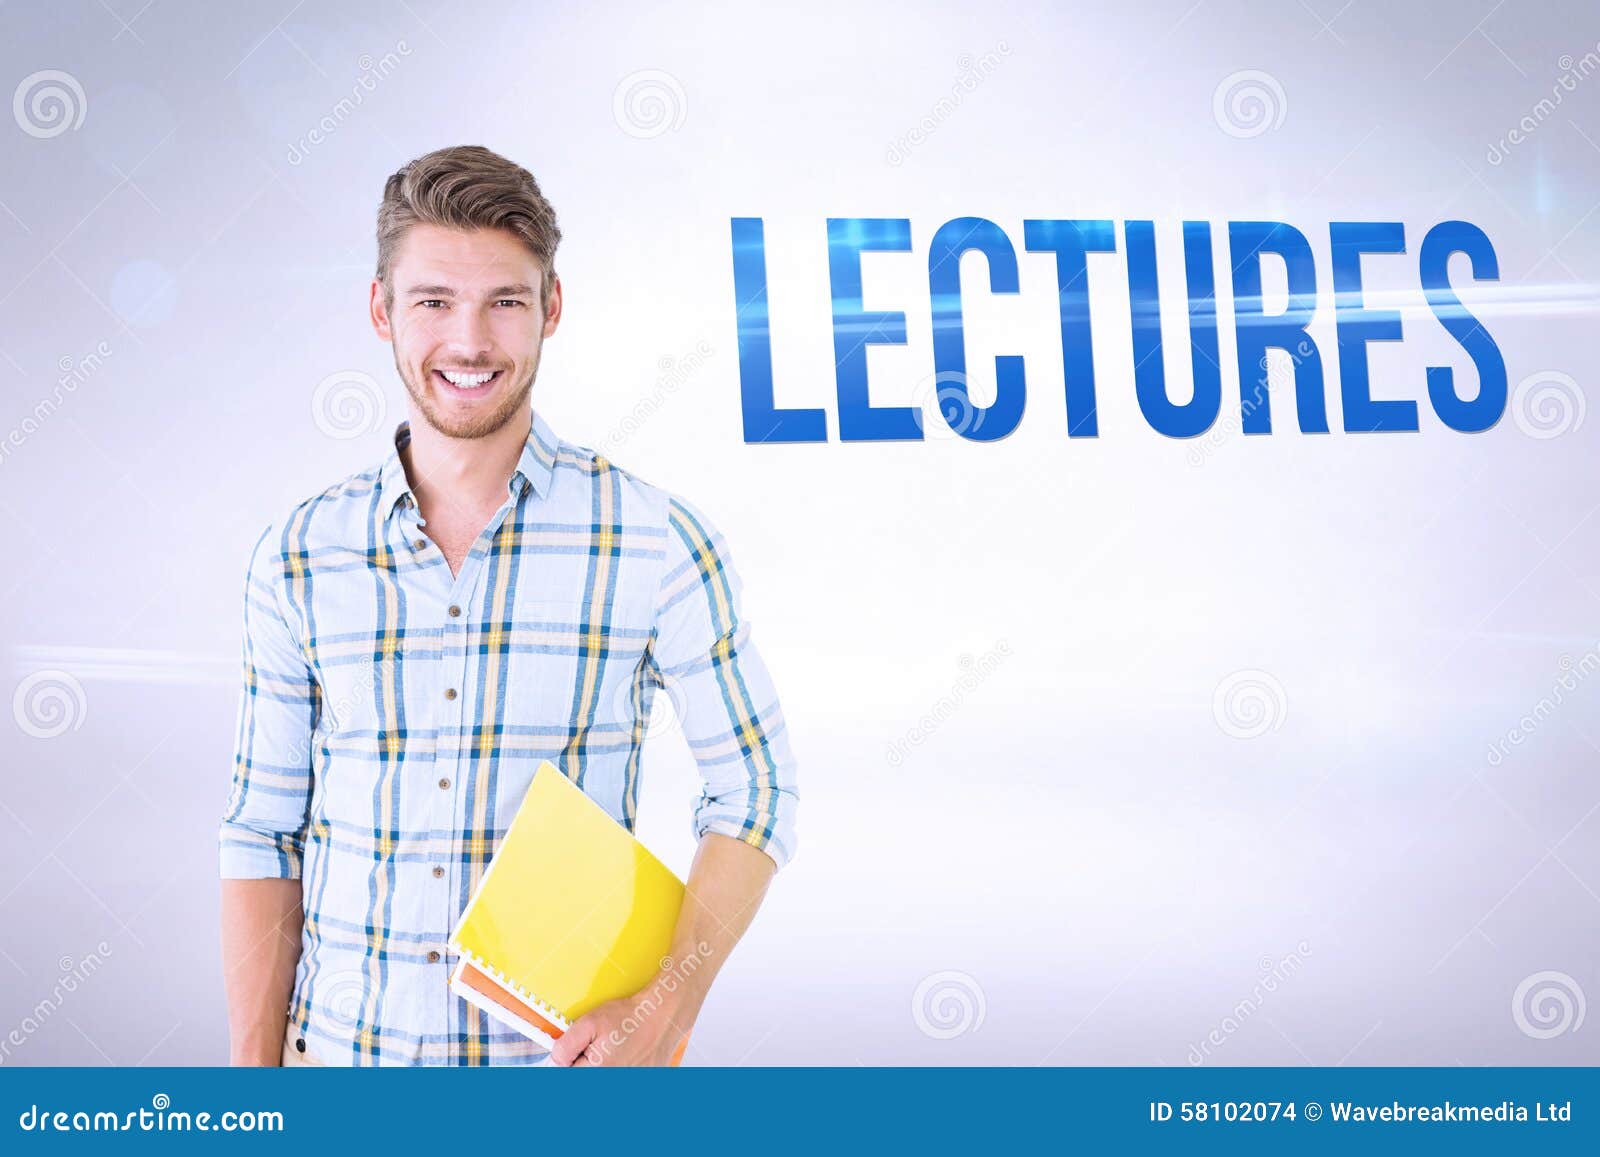 lectures against grey background